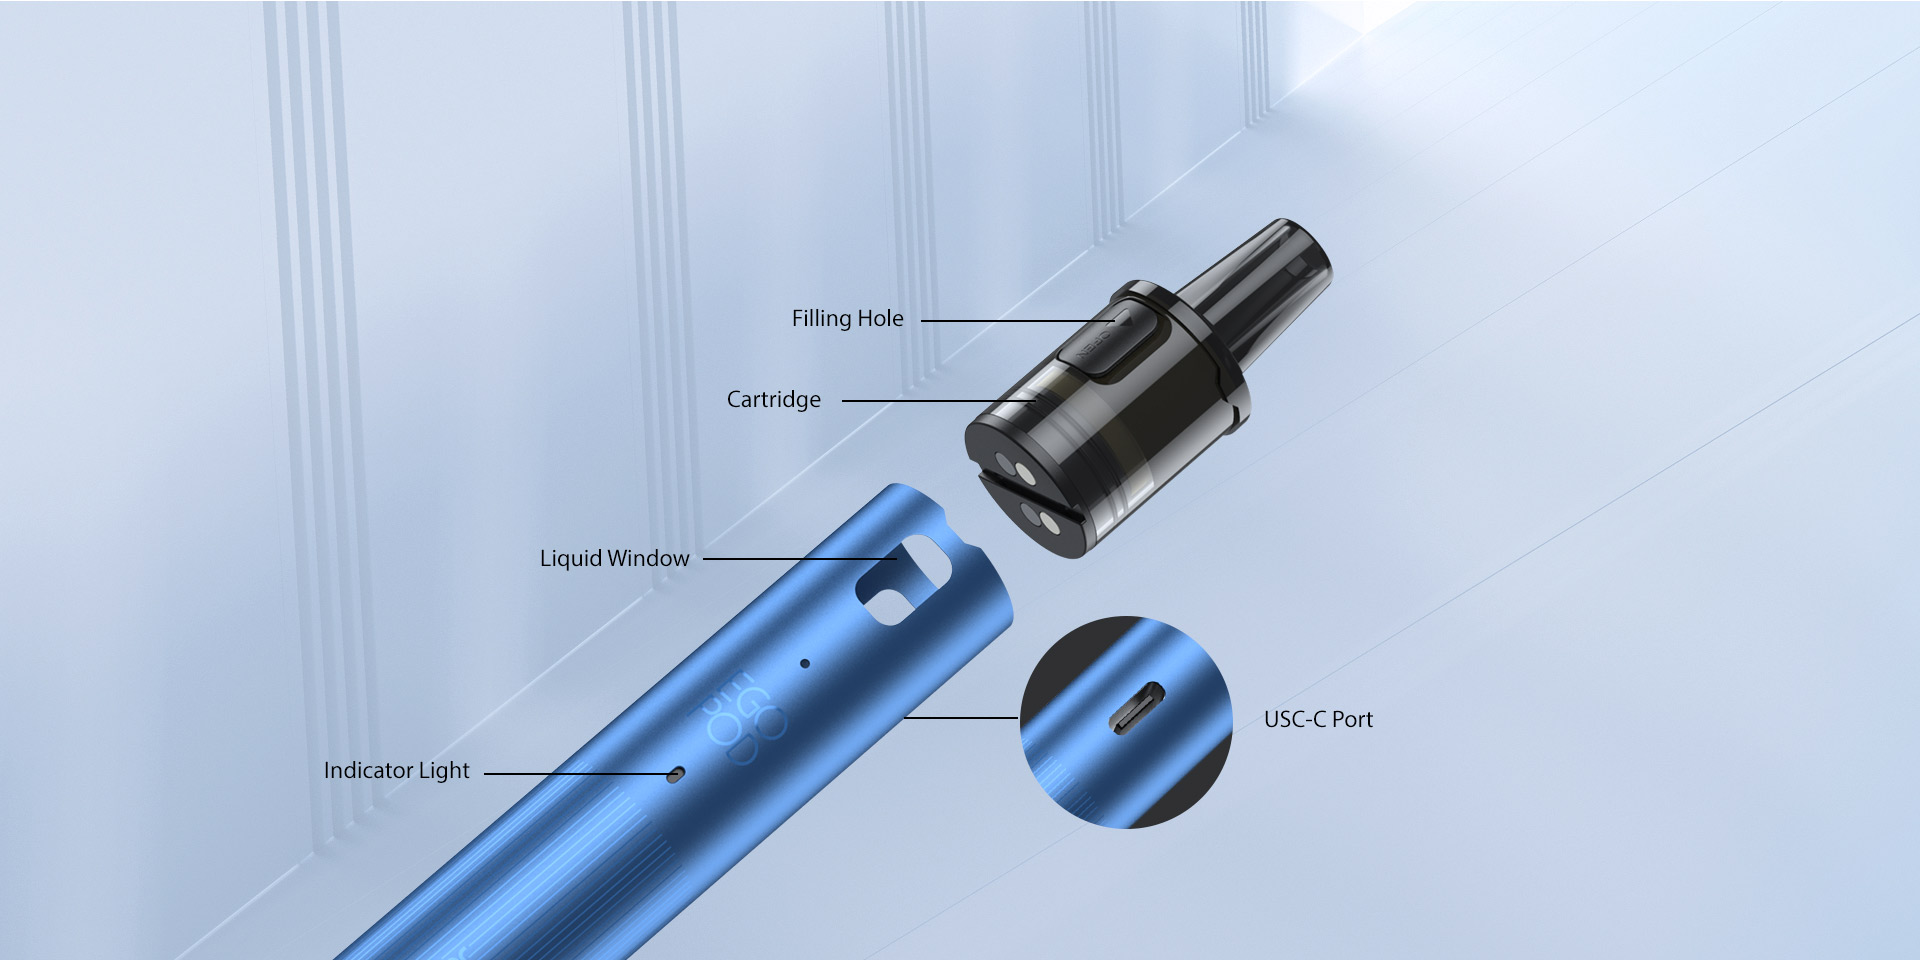 eGo POD update version include different parts like Filling Hole, Cartridge, Liquid Window, Indicator Light and USC-C Port.